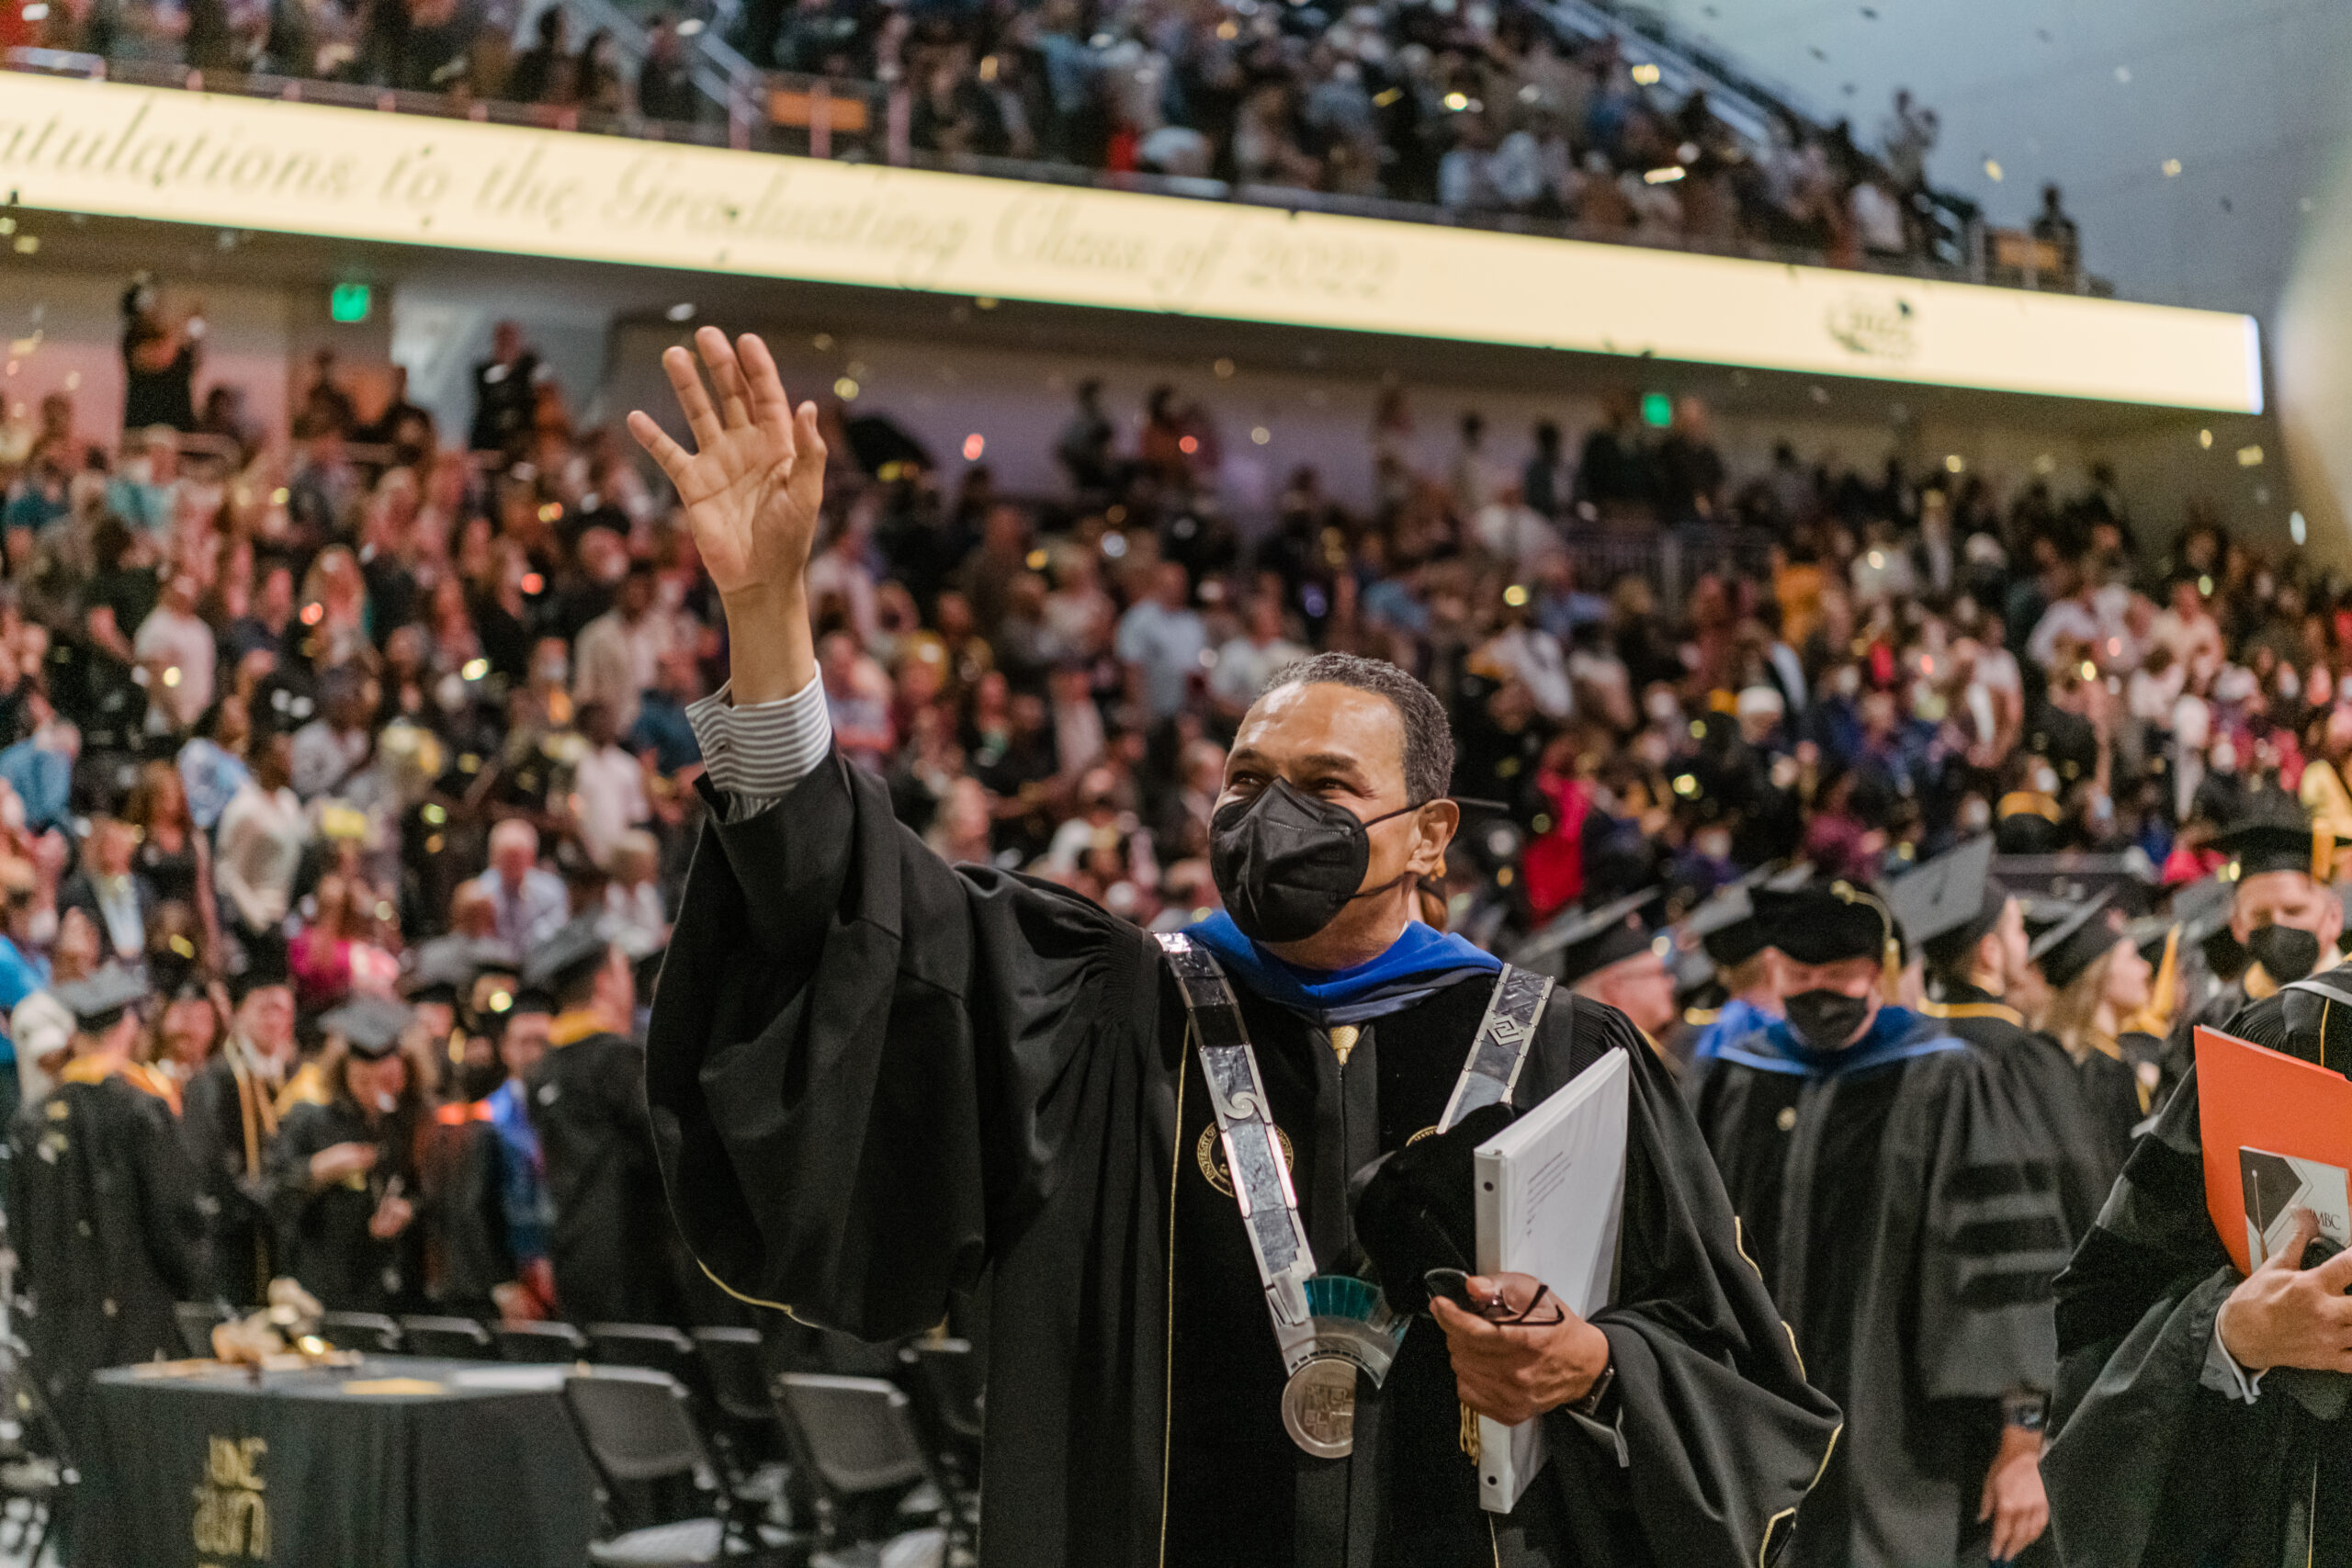 Pres. Freeman Hrabowski honors Class of 2022 at final commencement as UMBC leader